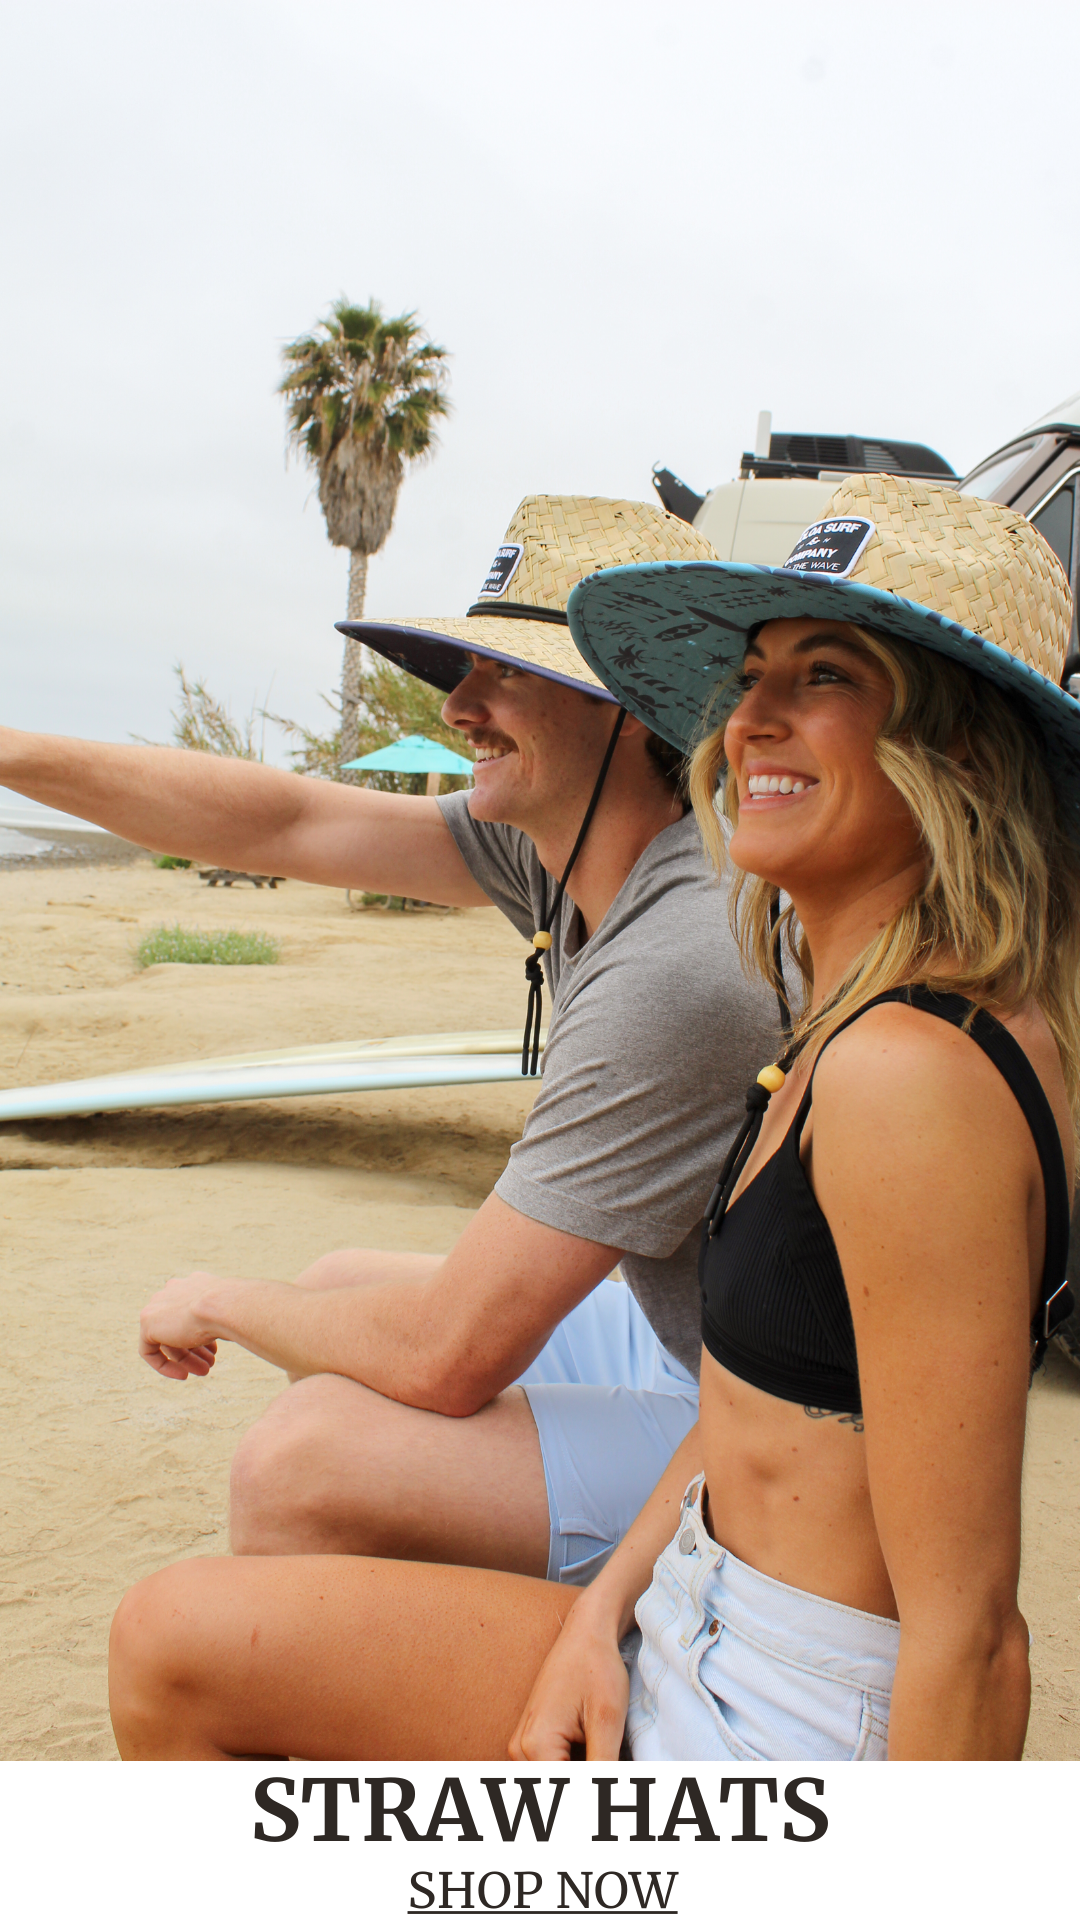 Koloa Surf Company Straw Hats - Shield yourself from the sun in style with our trendy and durable straw hats. Shop now for beach-ready fashion!